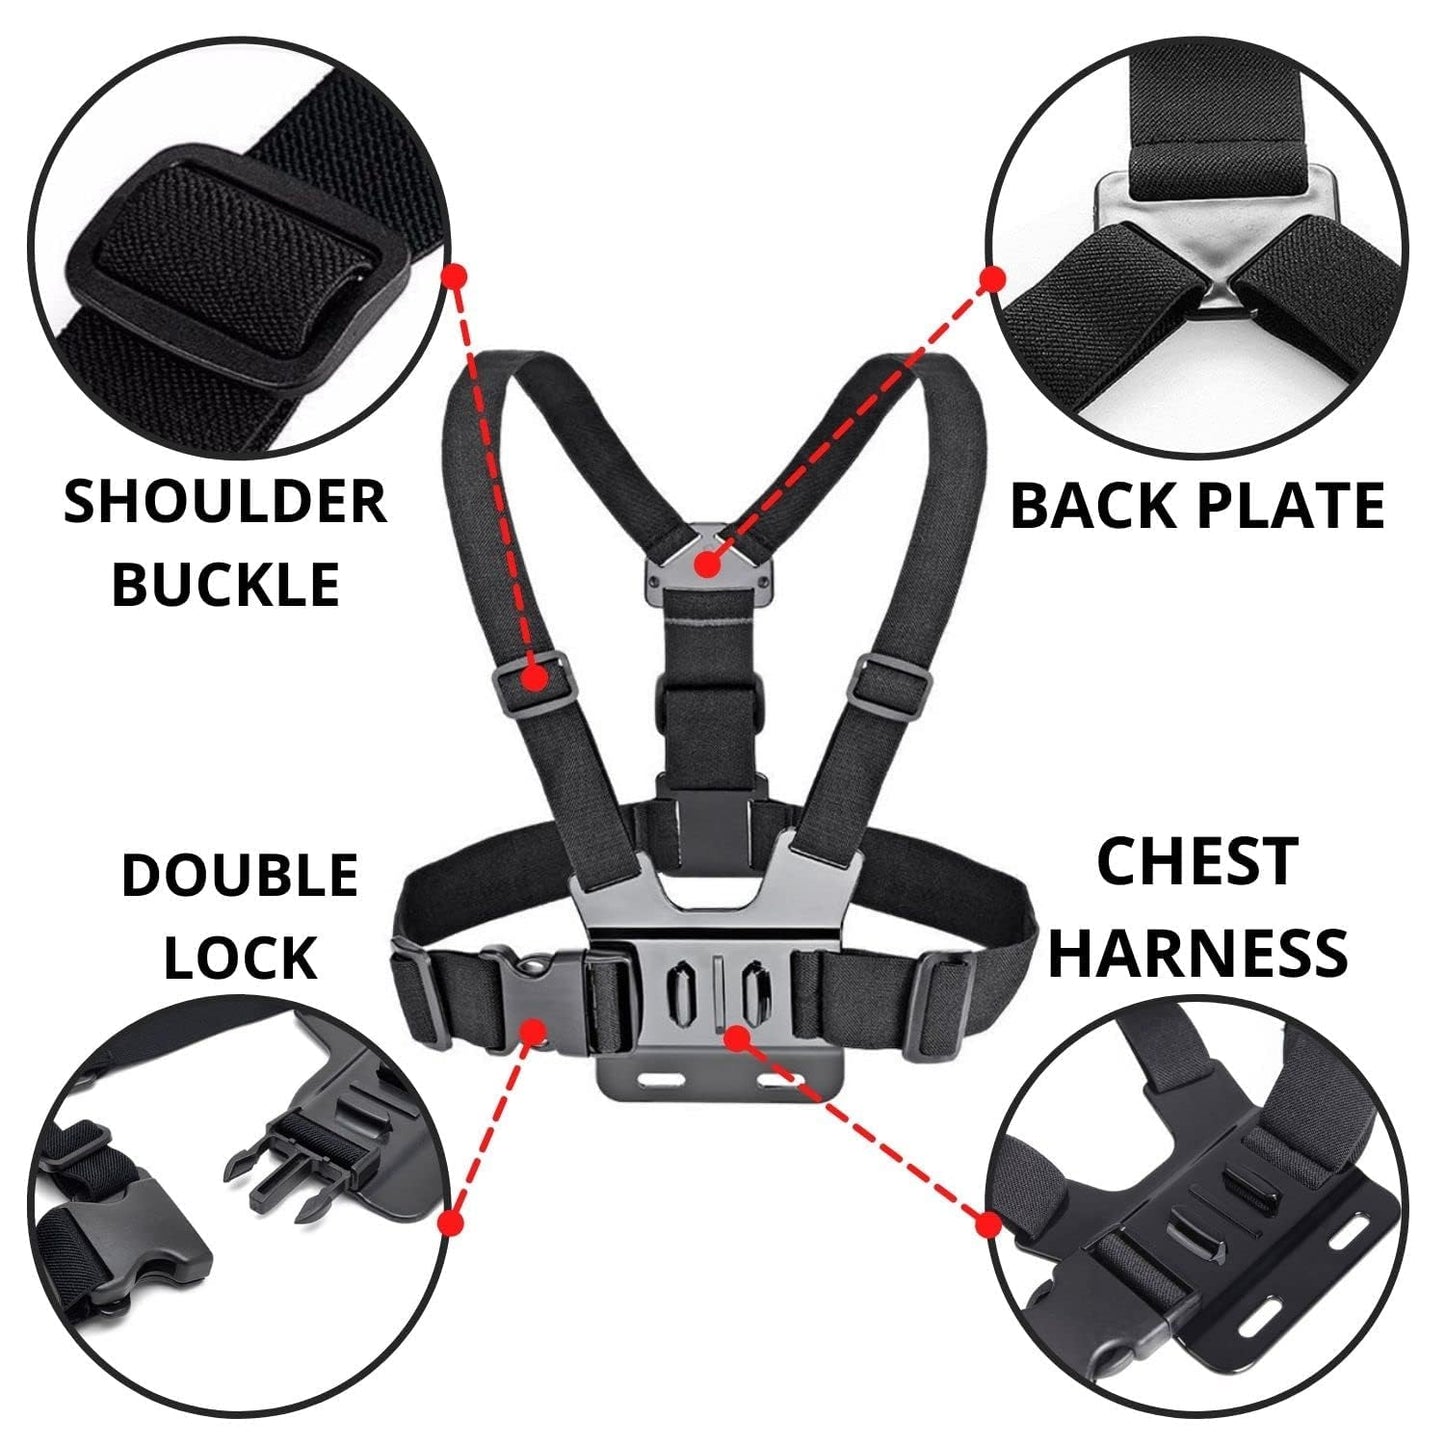 EYUVAA Camera Chest Strap Belt Compatible with Gopro Hero & Other Action Cameras (Black)